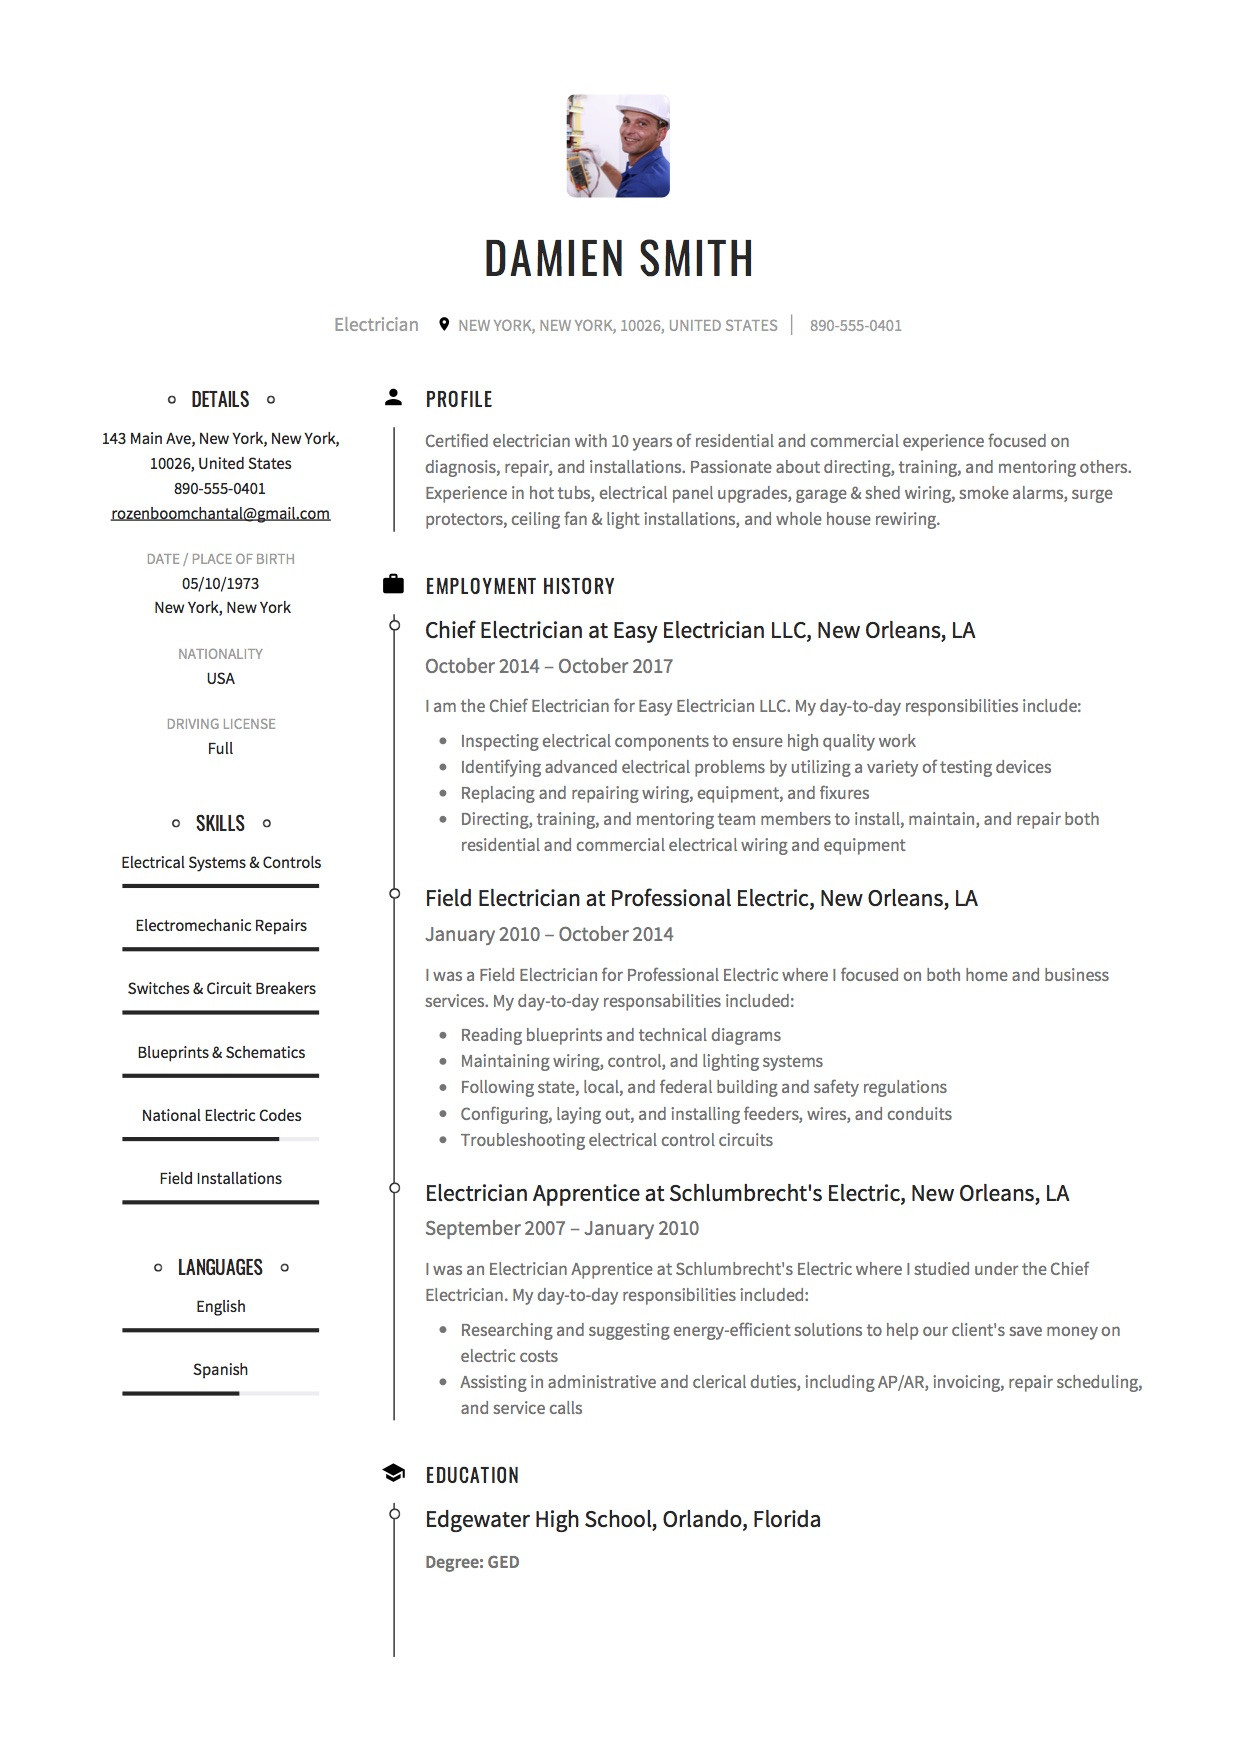 10 Years It Experience Resume Samples Making A Resume Does Go Easy! – Resumeviking.com